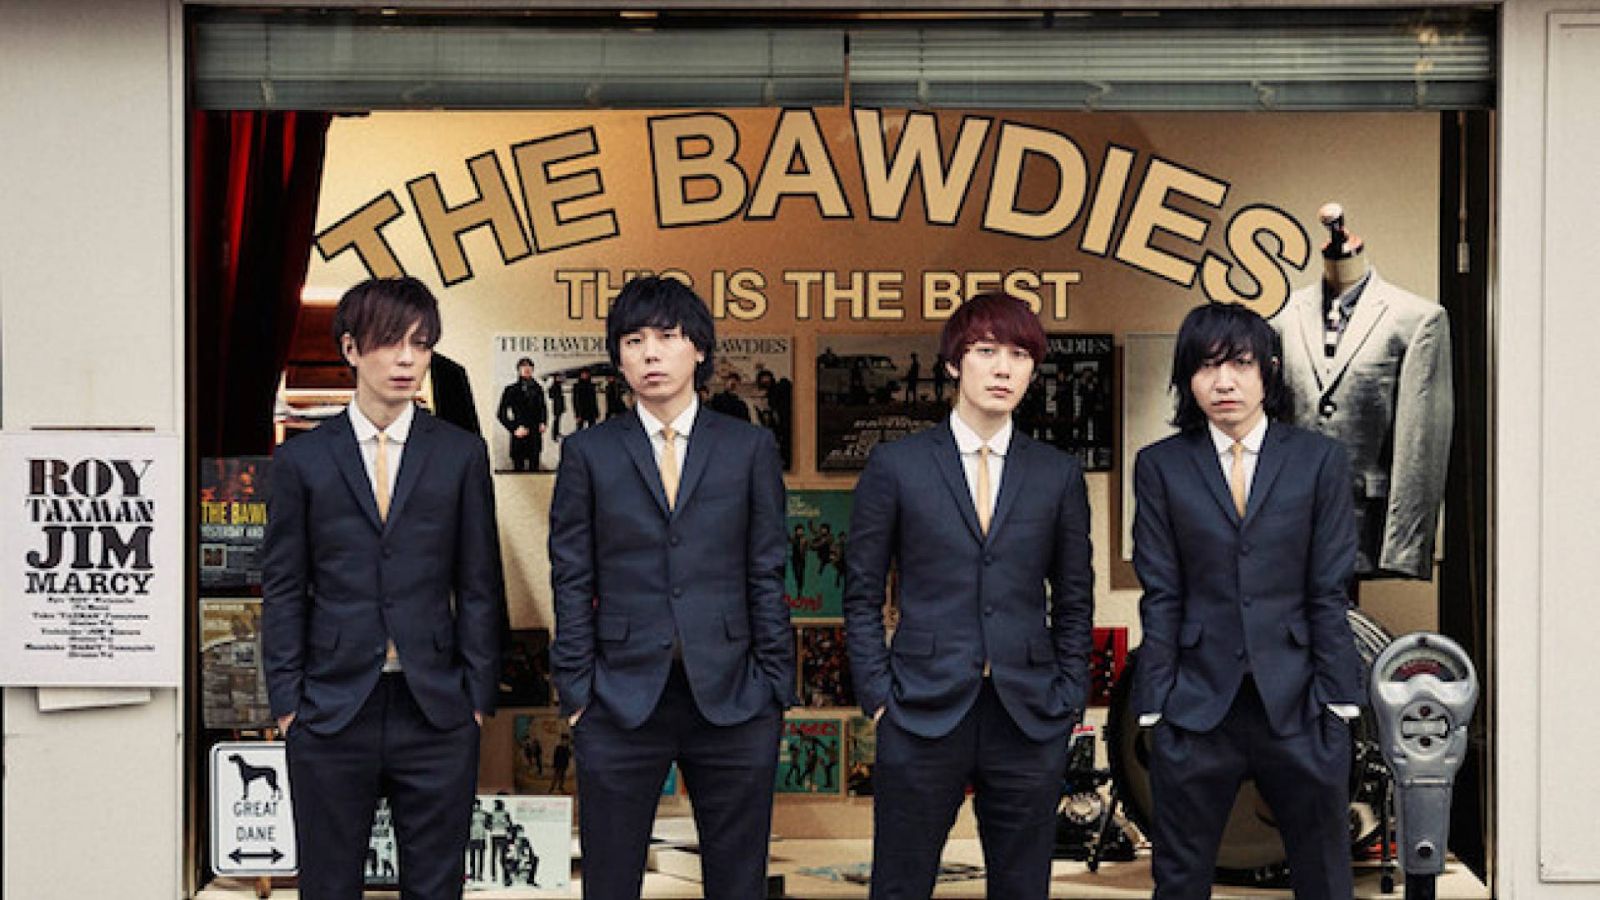 THE BAWDIES' Greatest Hits Album © THE BAWDIES